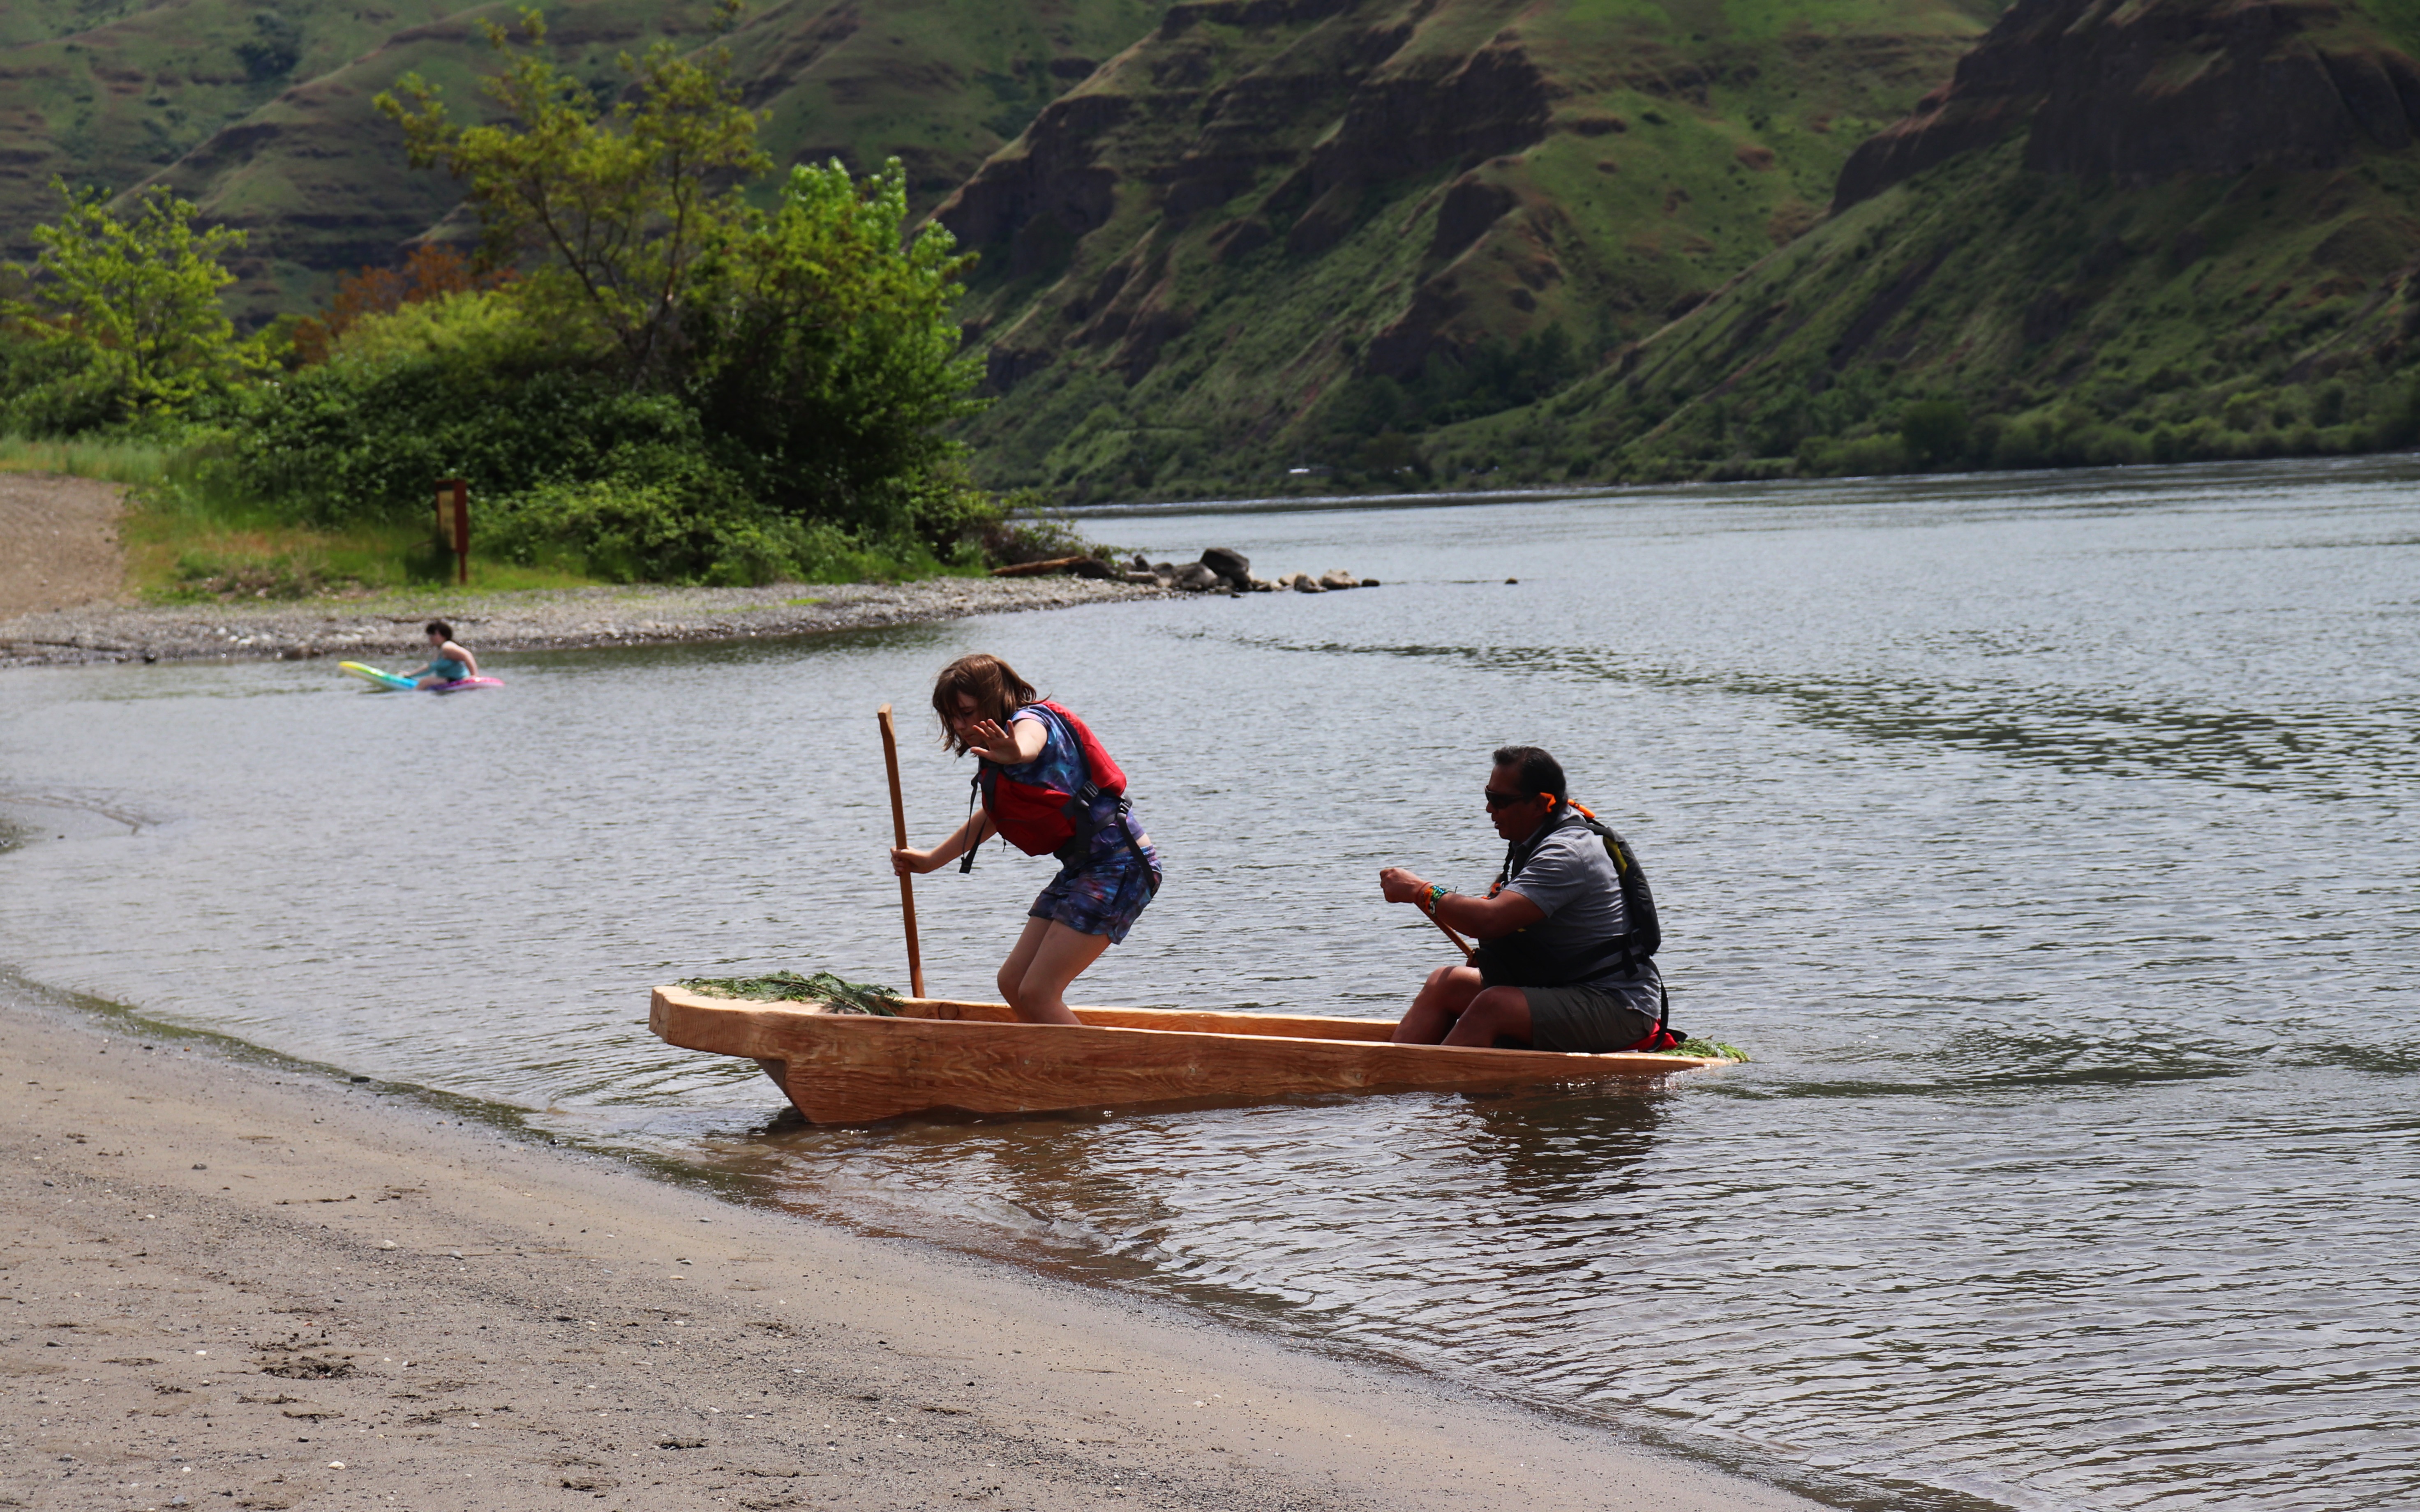 Josie Tate and Gary Dorr row across the water in a dugout canoe